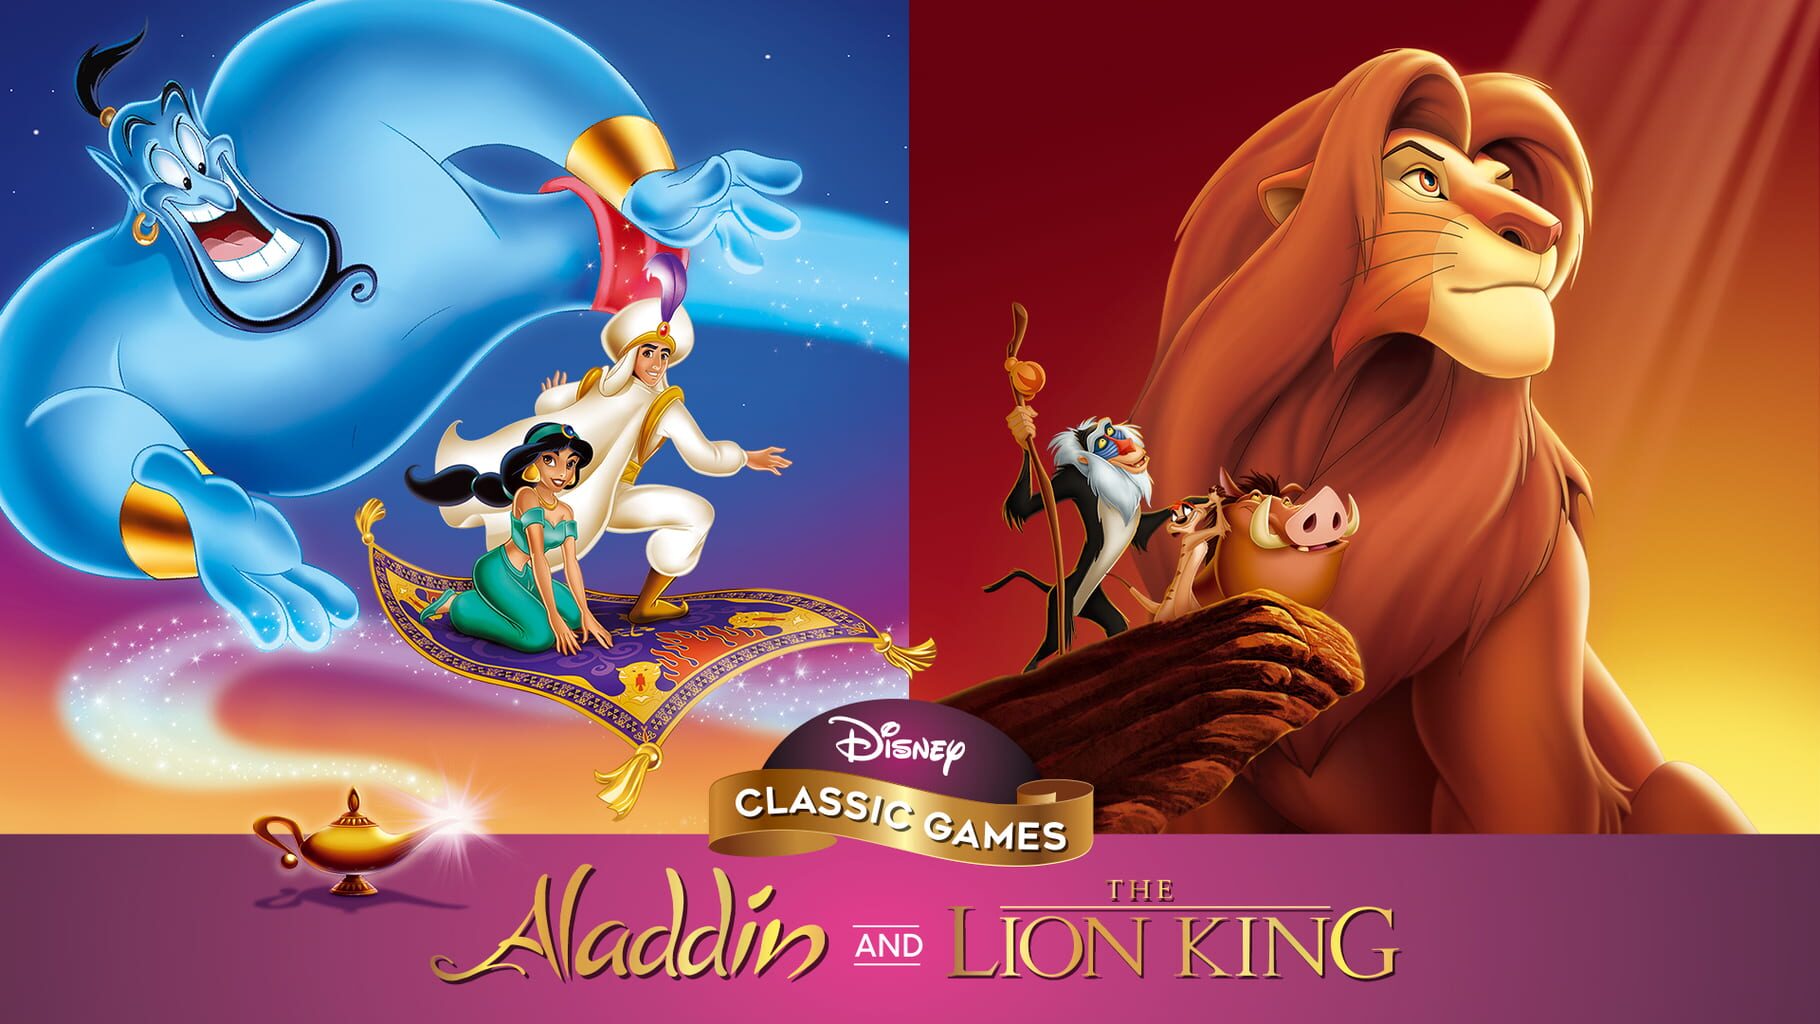 Arte - Disney Classic Games: Aladdin and The Lion King